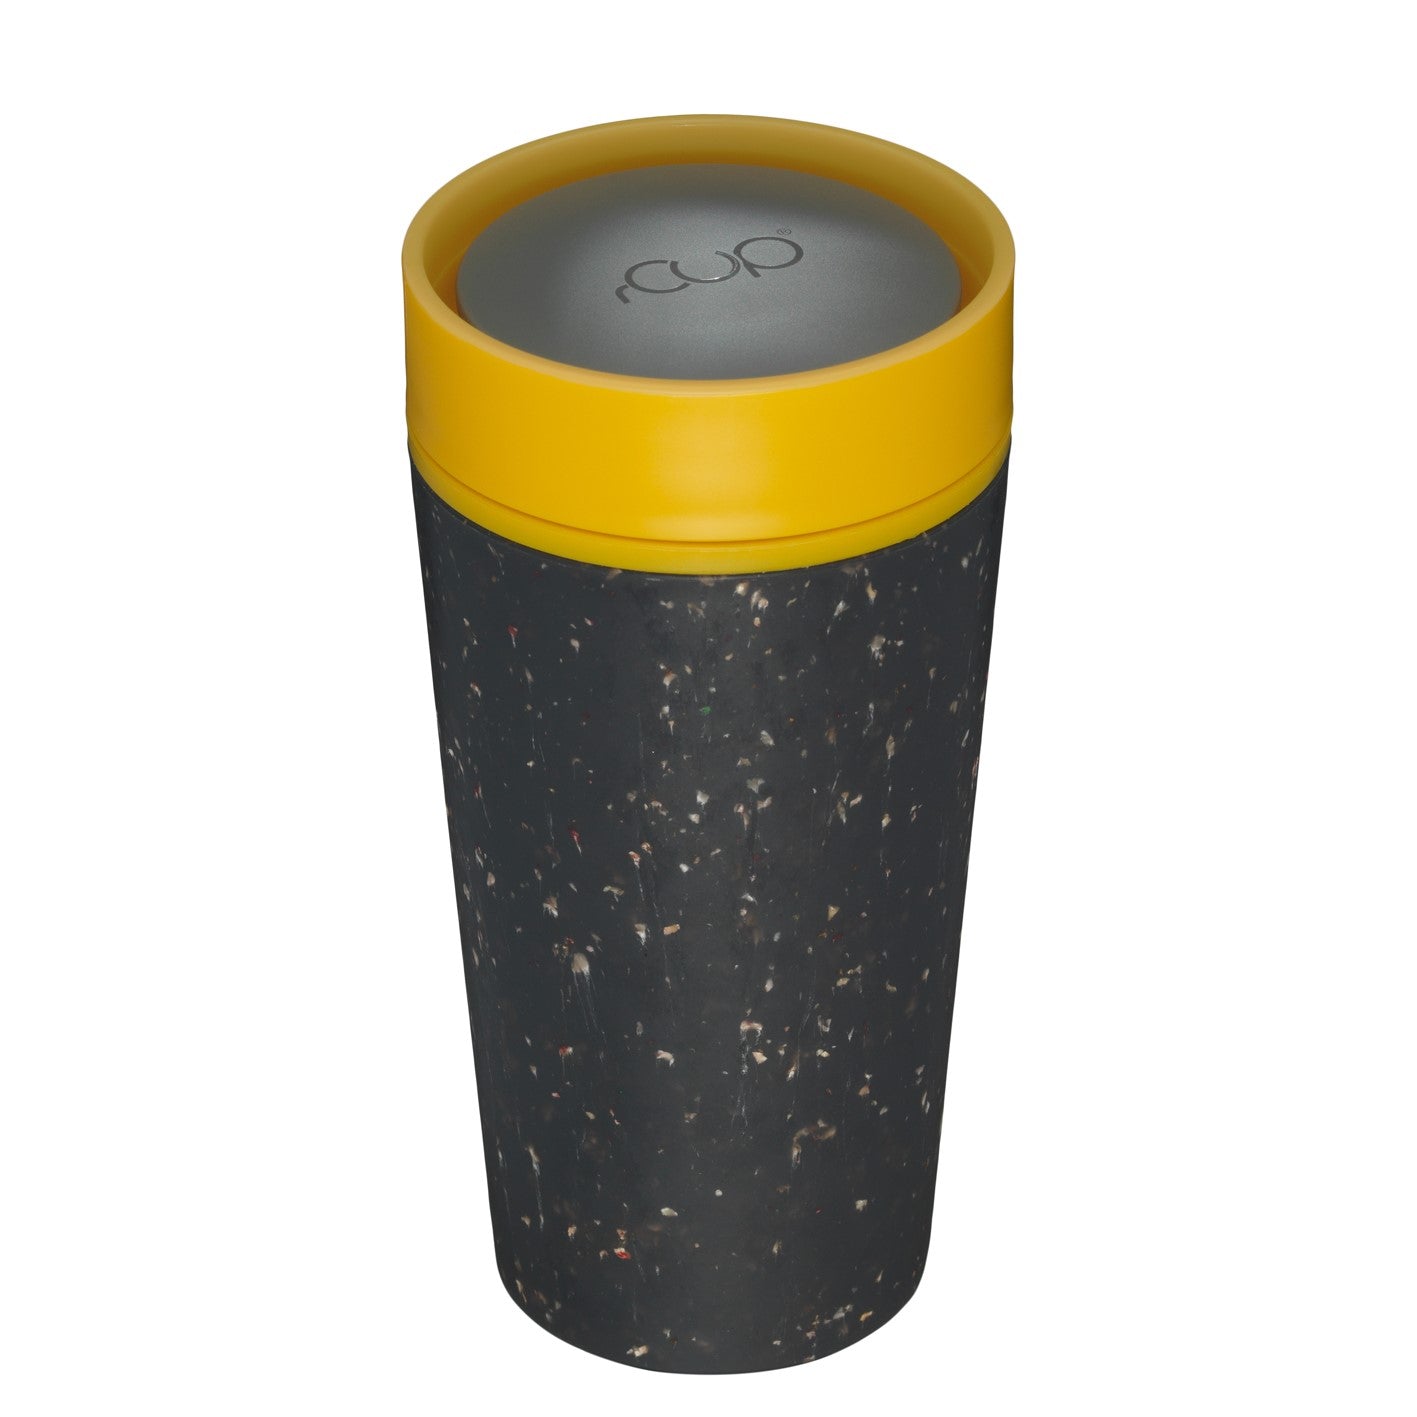 12oz rCup Black and Mustard